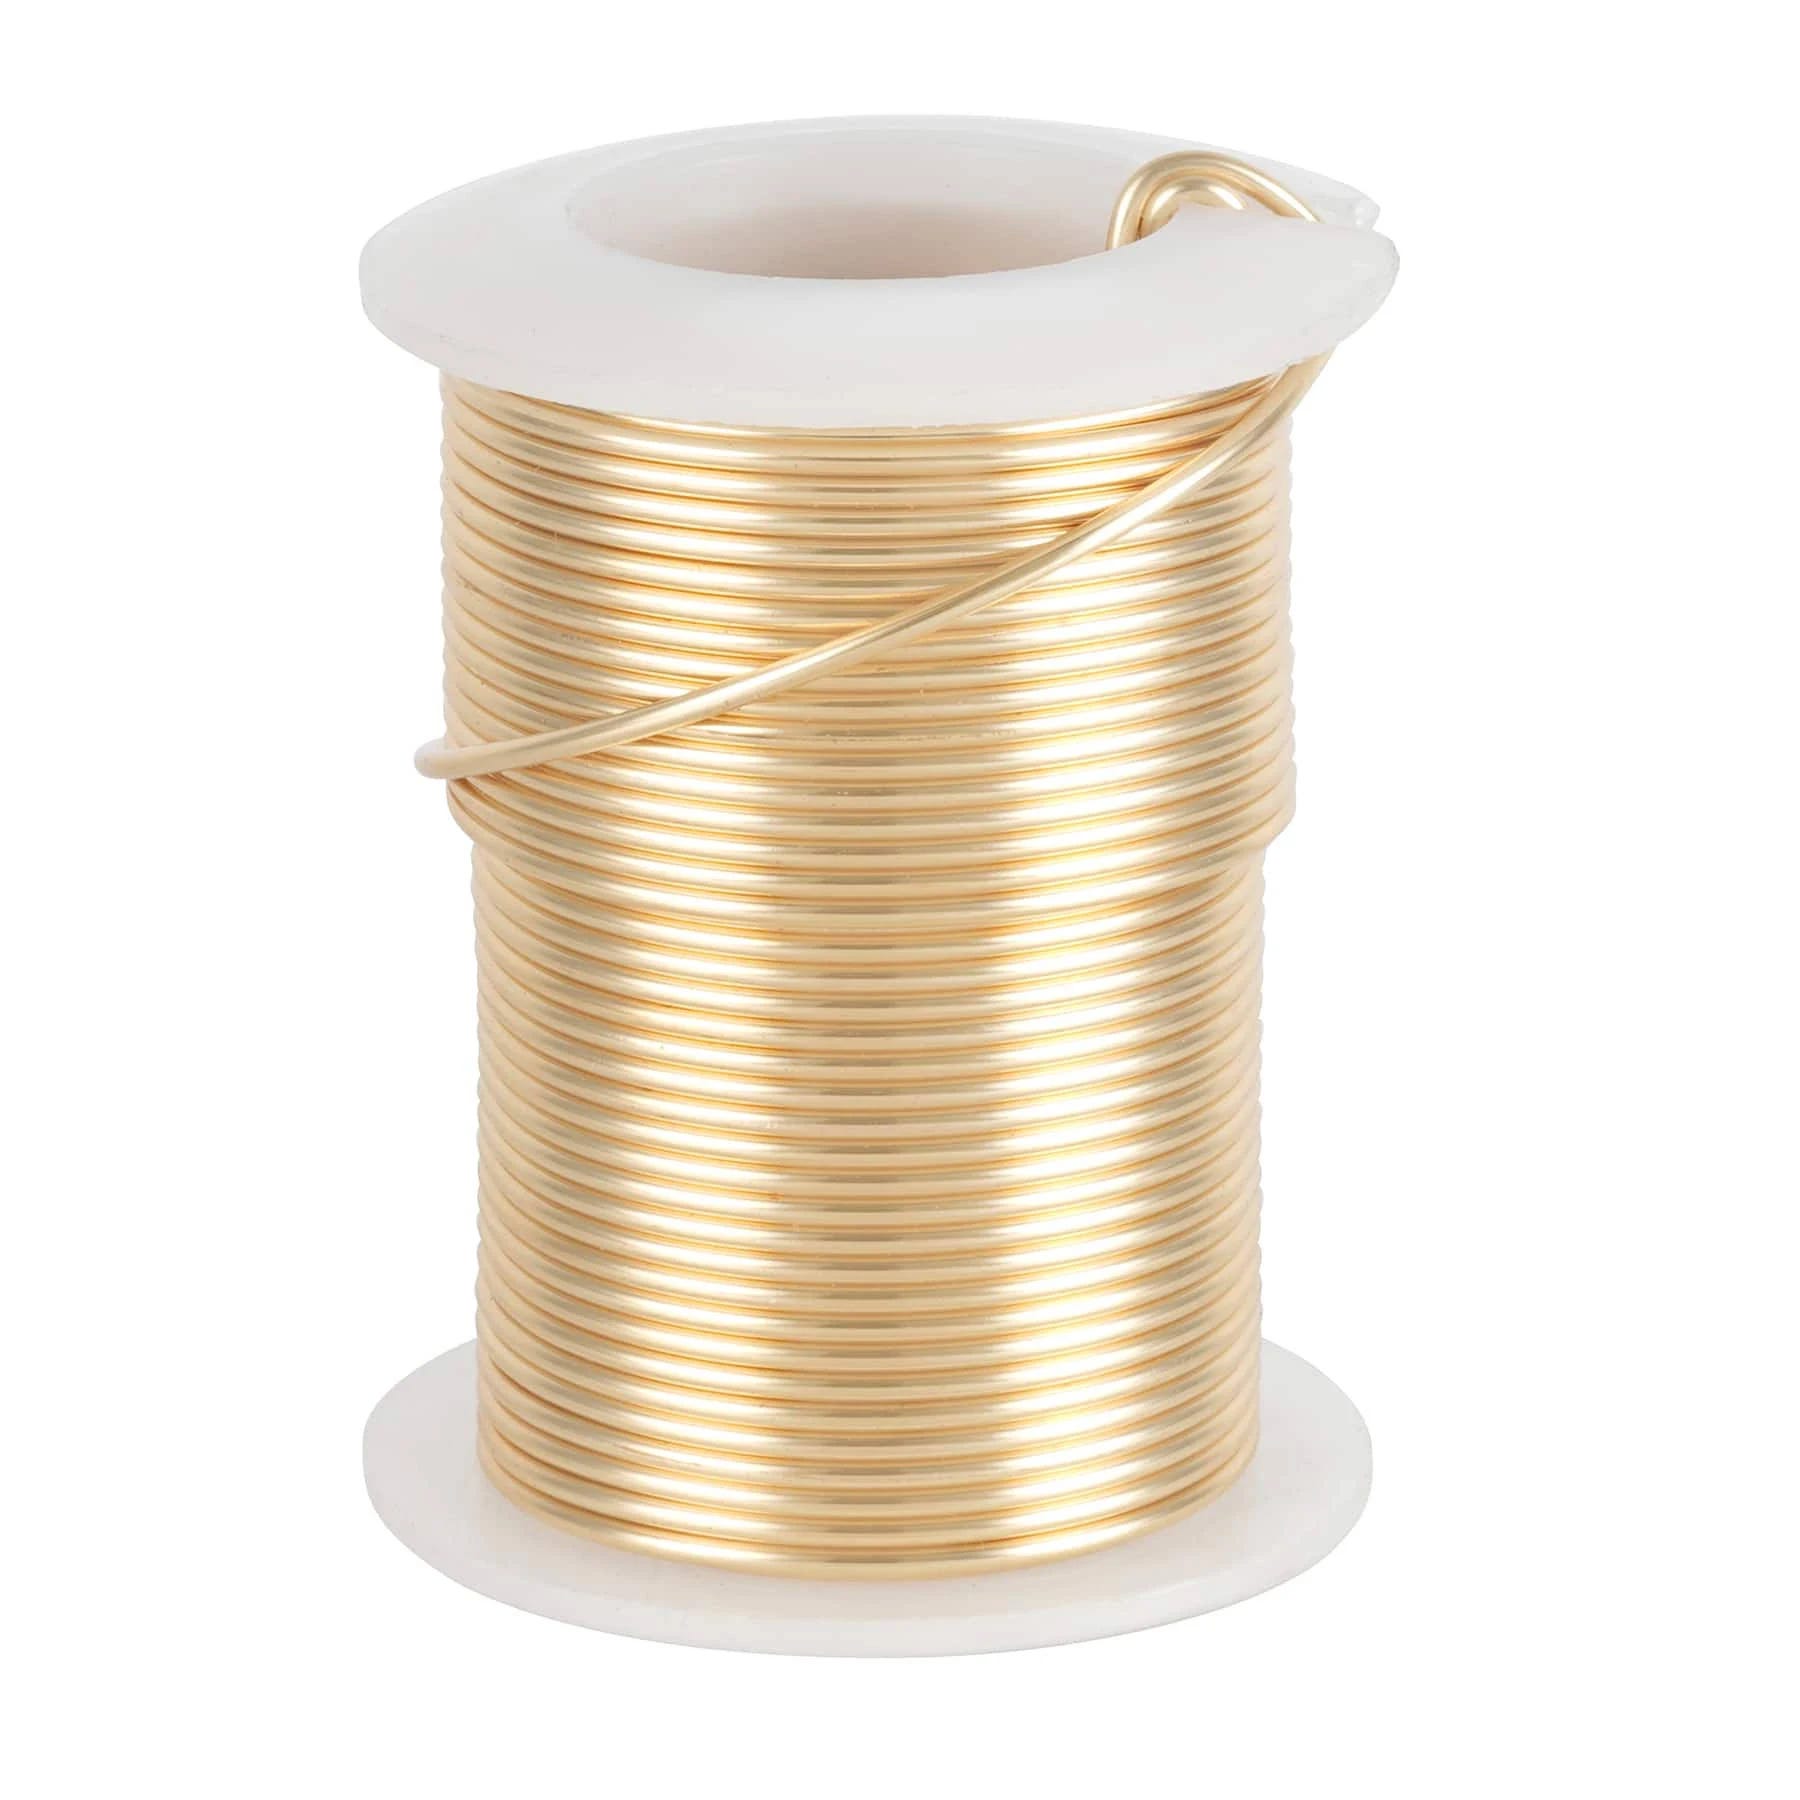 16 Gauge Gold-Tarnish Resistant Wire for Crafting Projects | Image